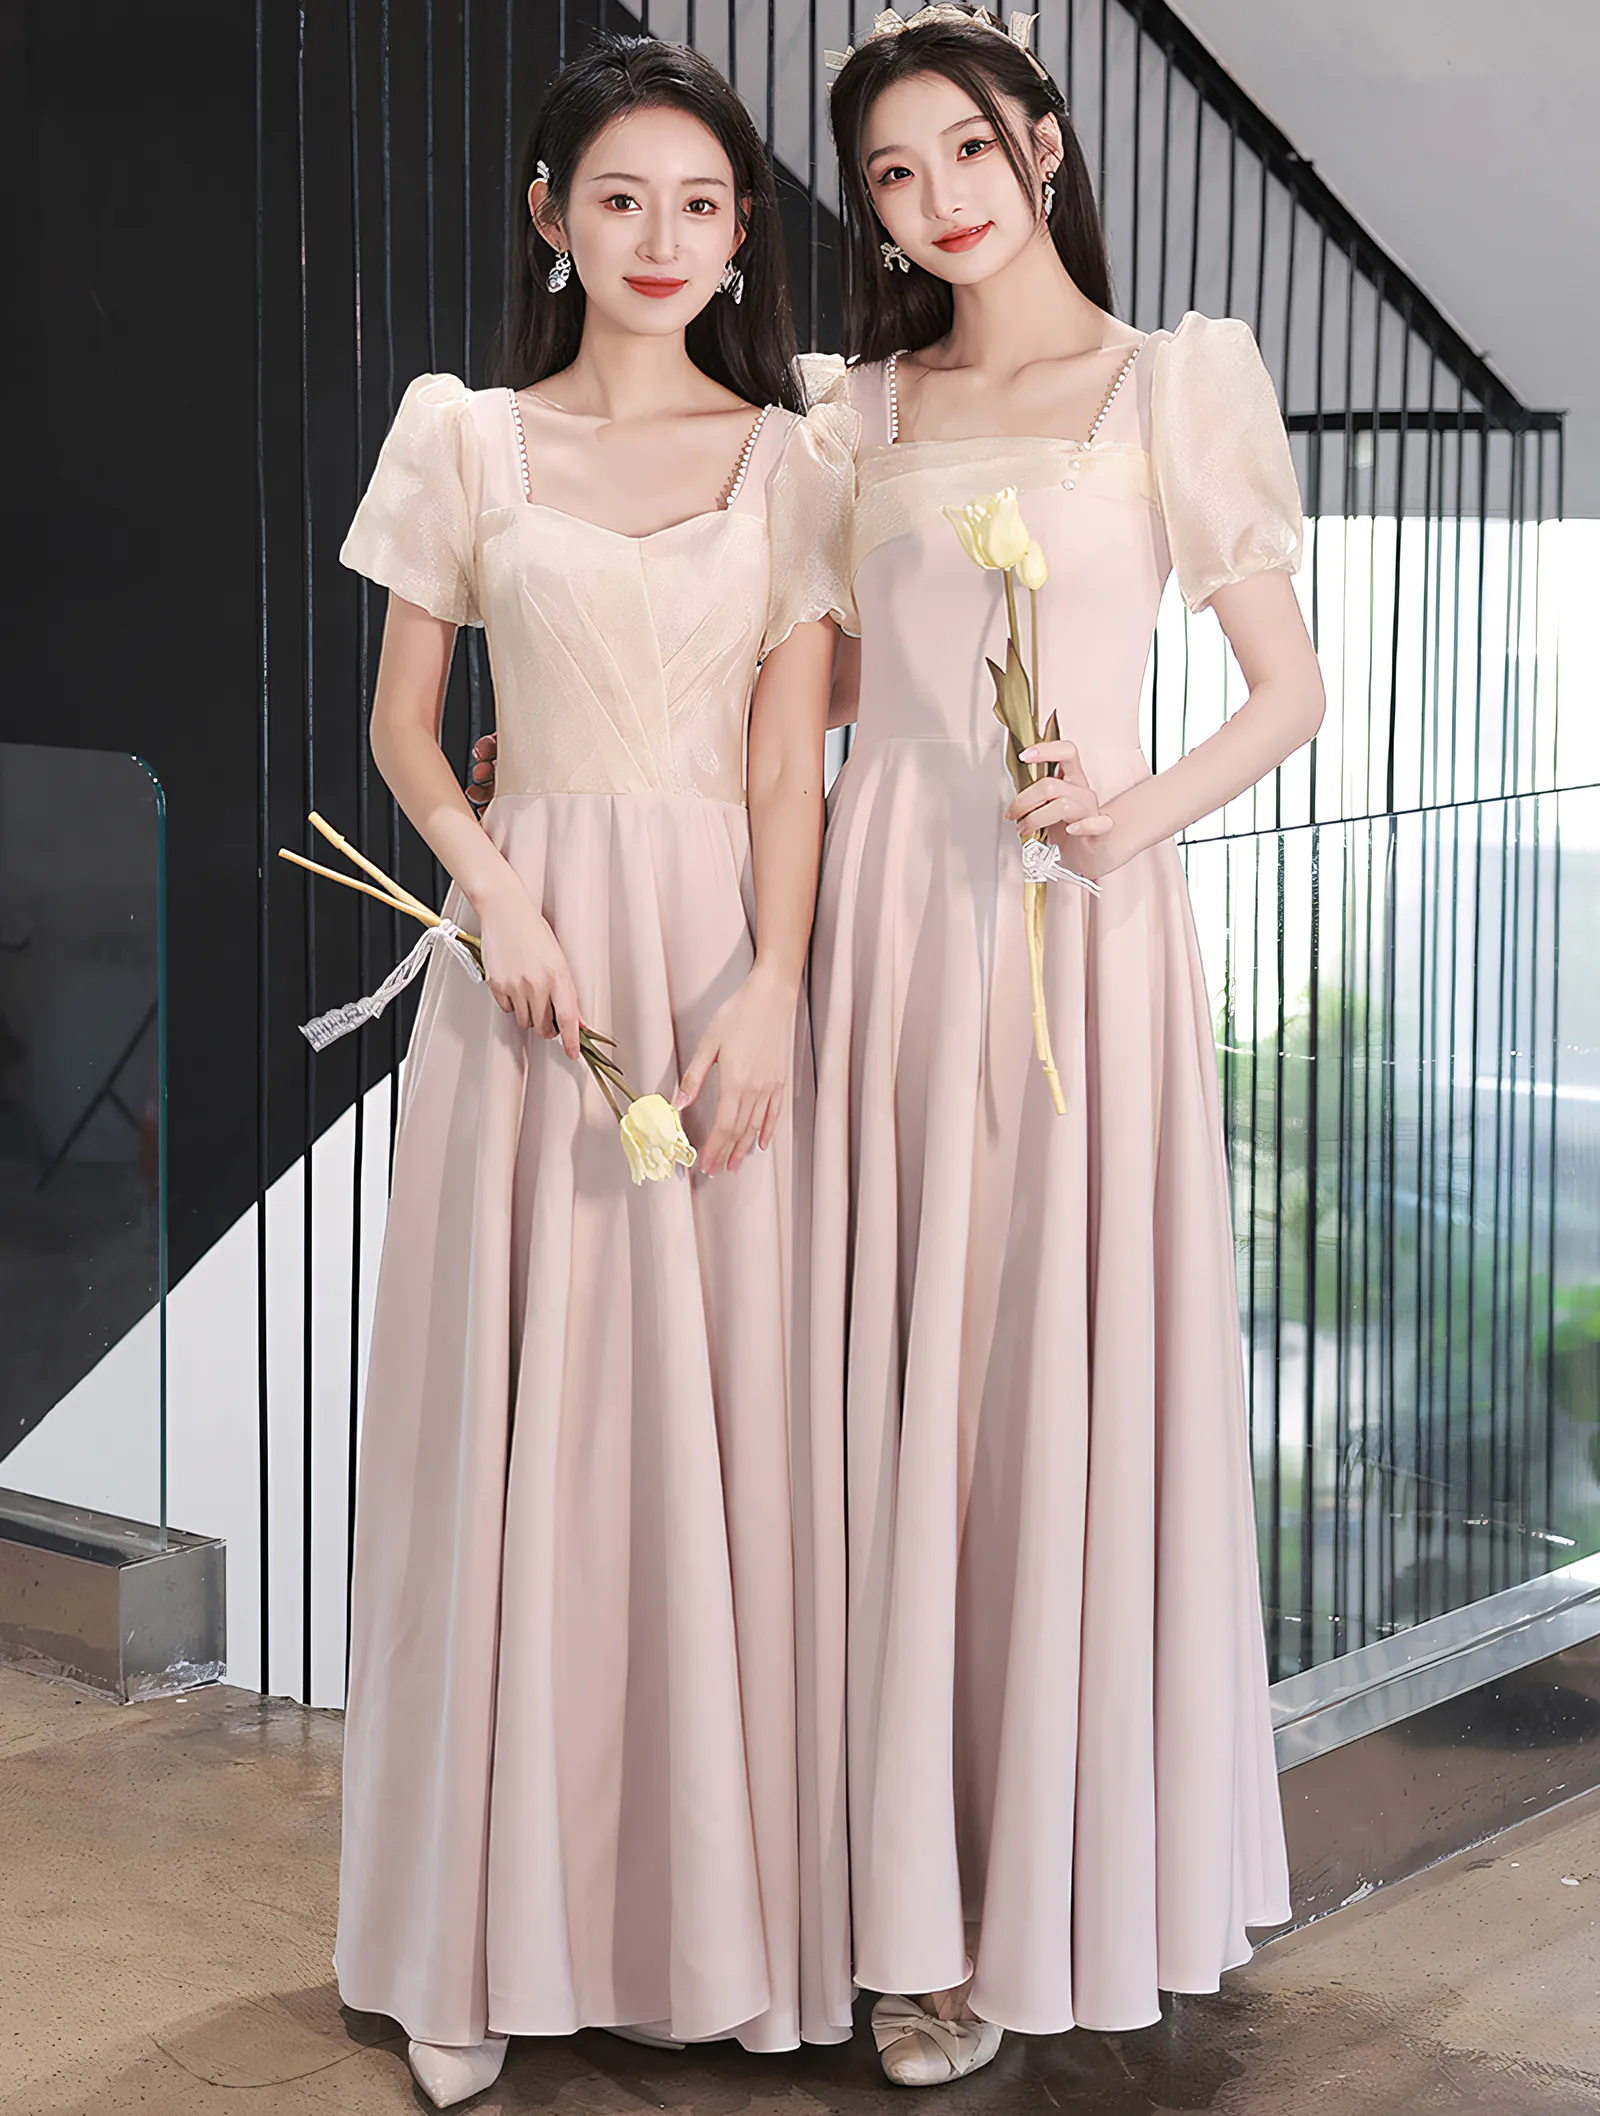 Simple Pink Short Sleeve Bridesmaid Dress Homecoming Graduation Gown01